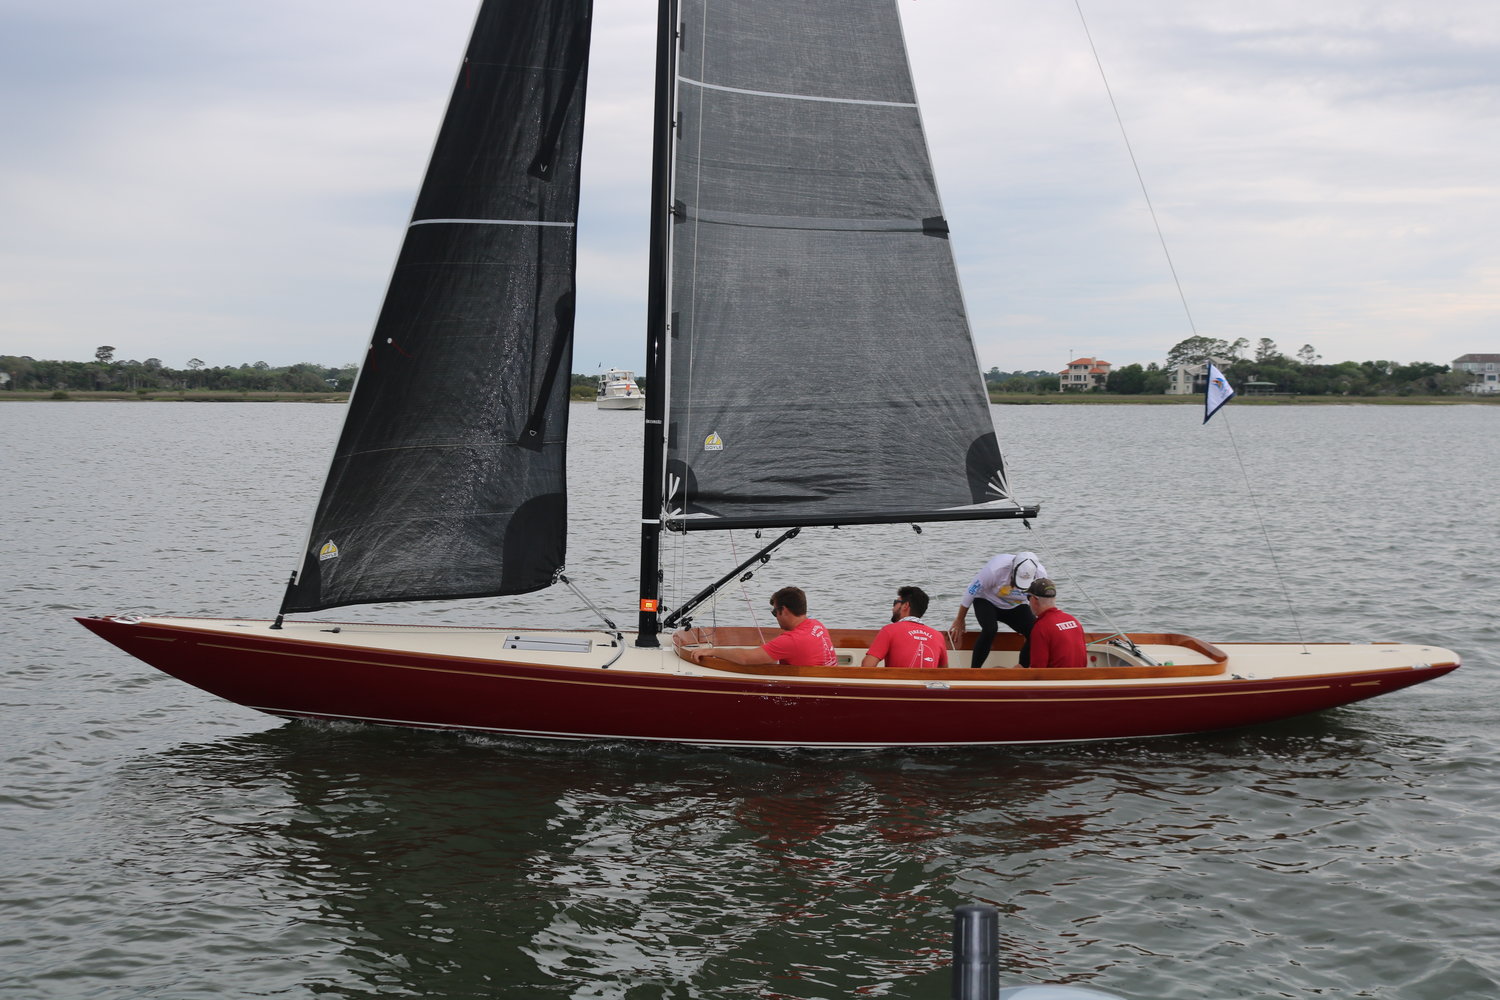 Fireball, captained by Tim Tucker, won first place in the St. Augustine Race Week Inshore Races on the Tolomato River.